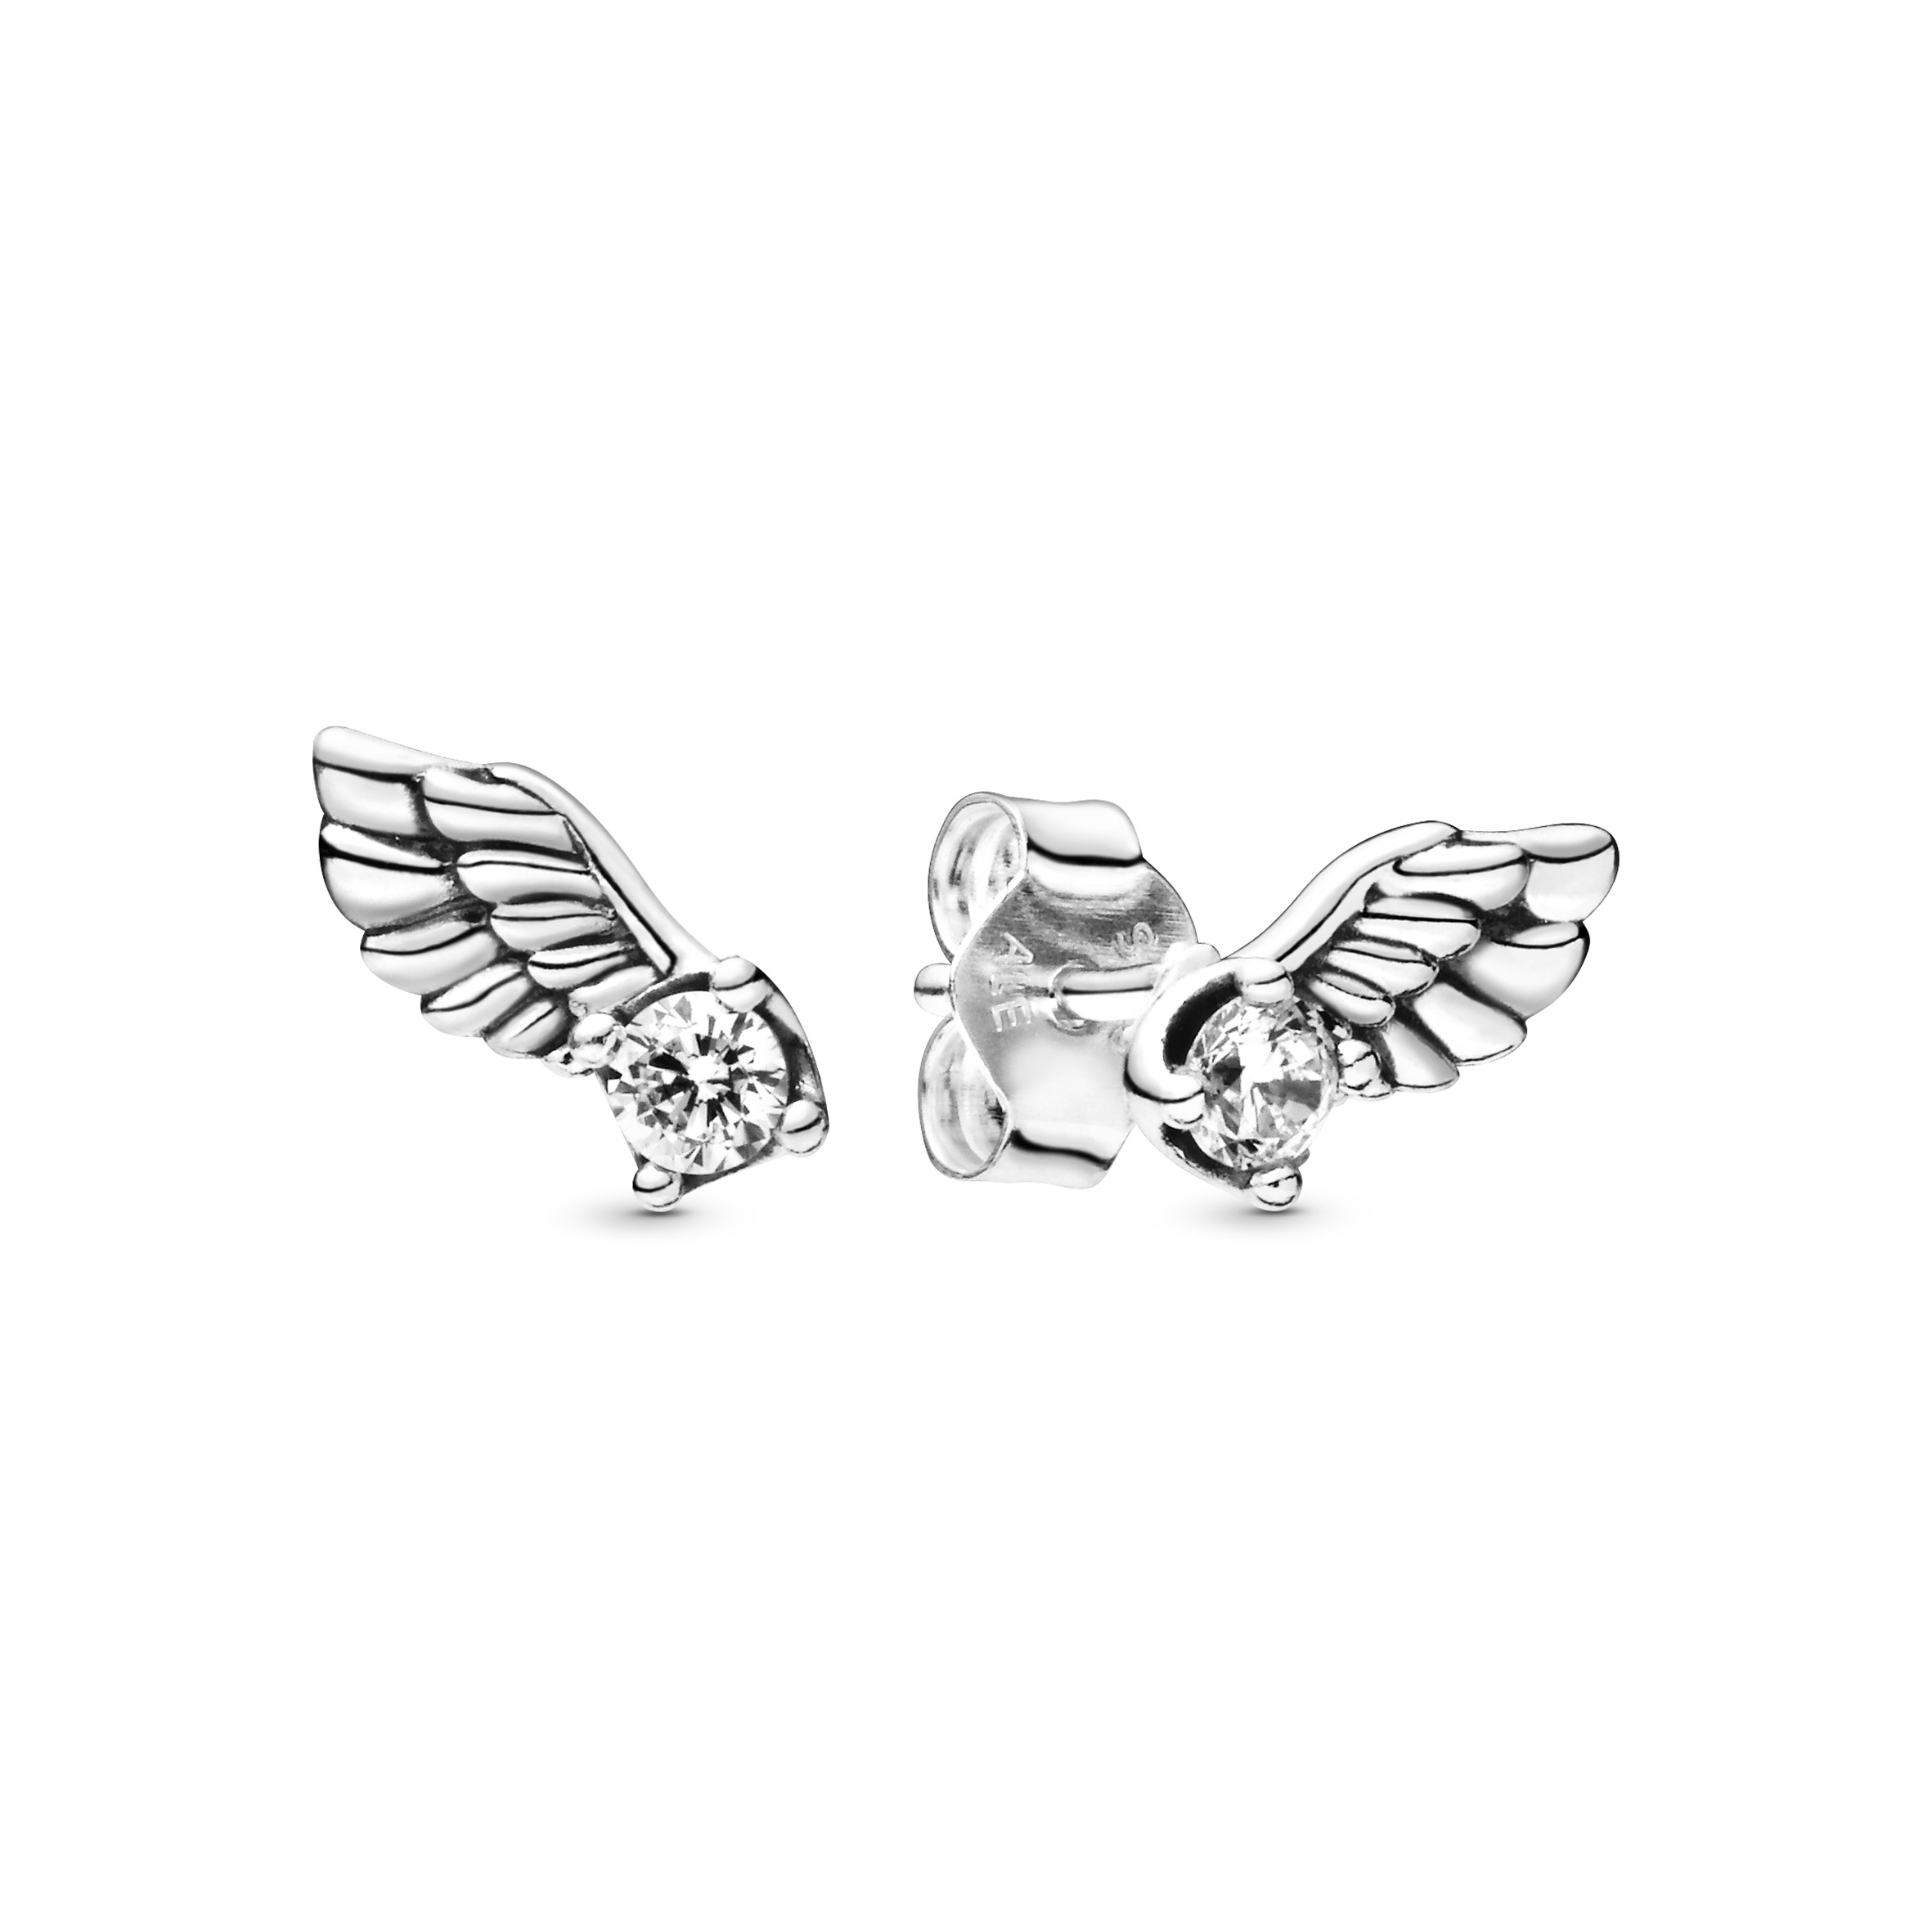 PANDORA PASSIONS Sparkling Angel Wing Stud Earrings - 298501C01